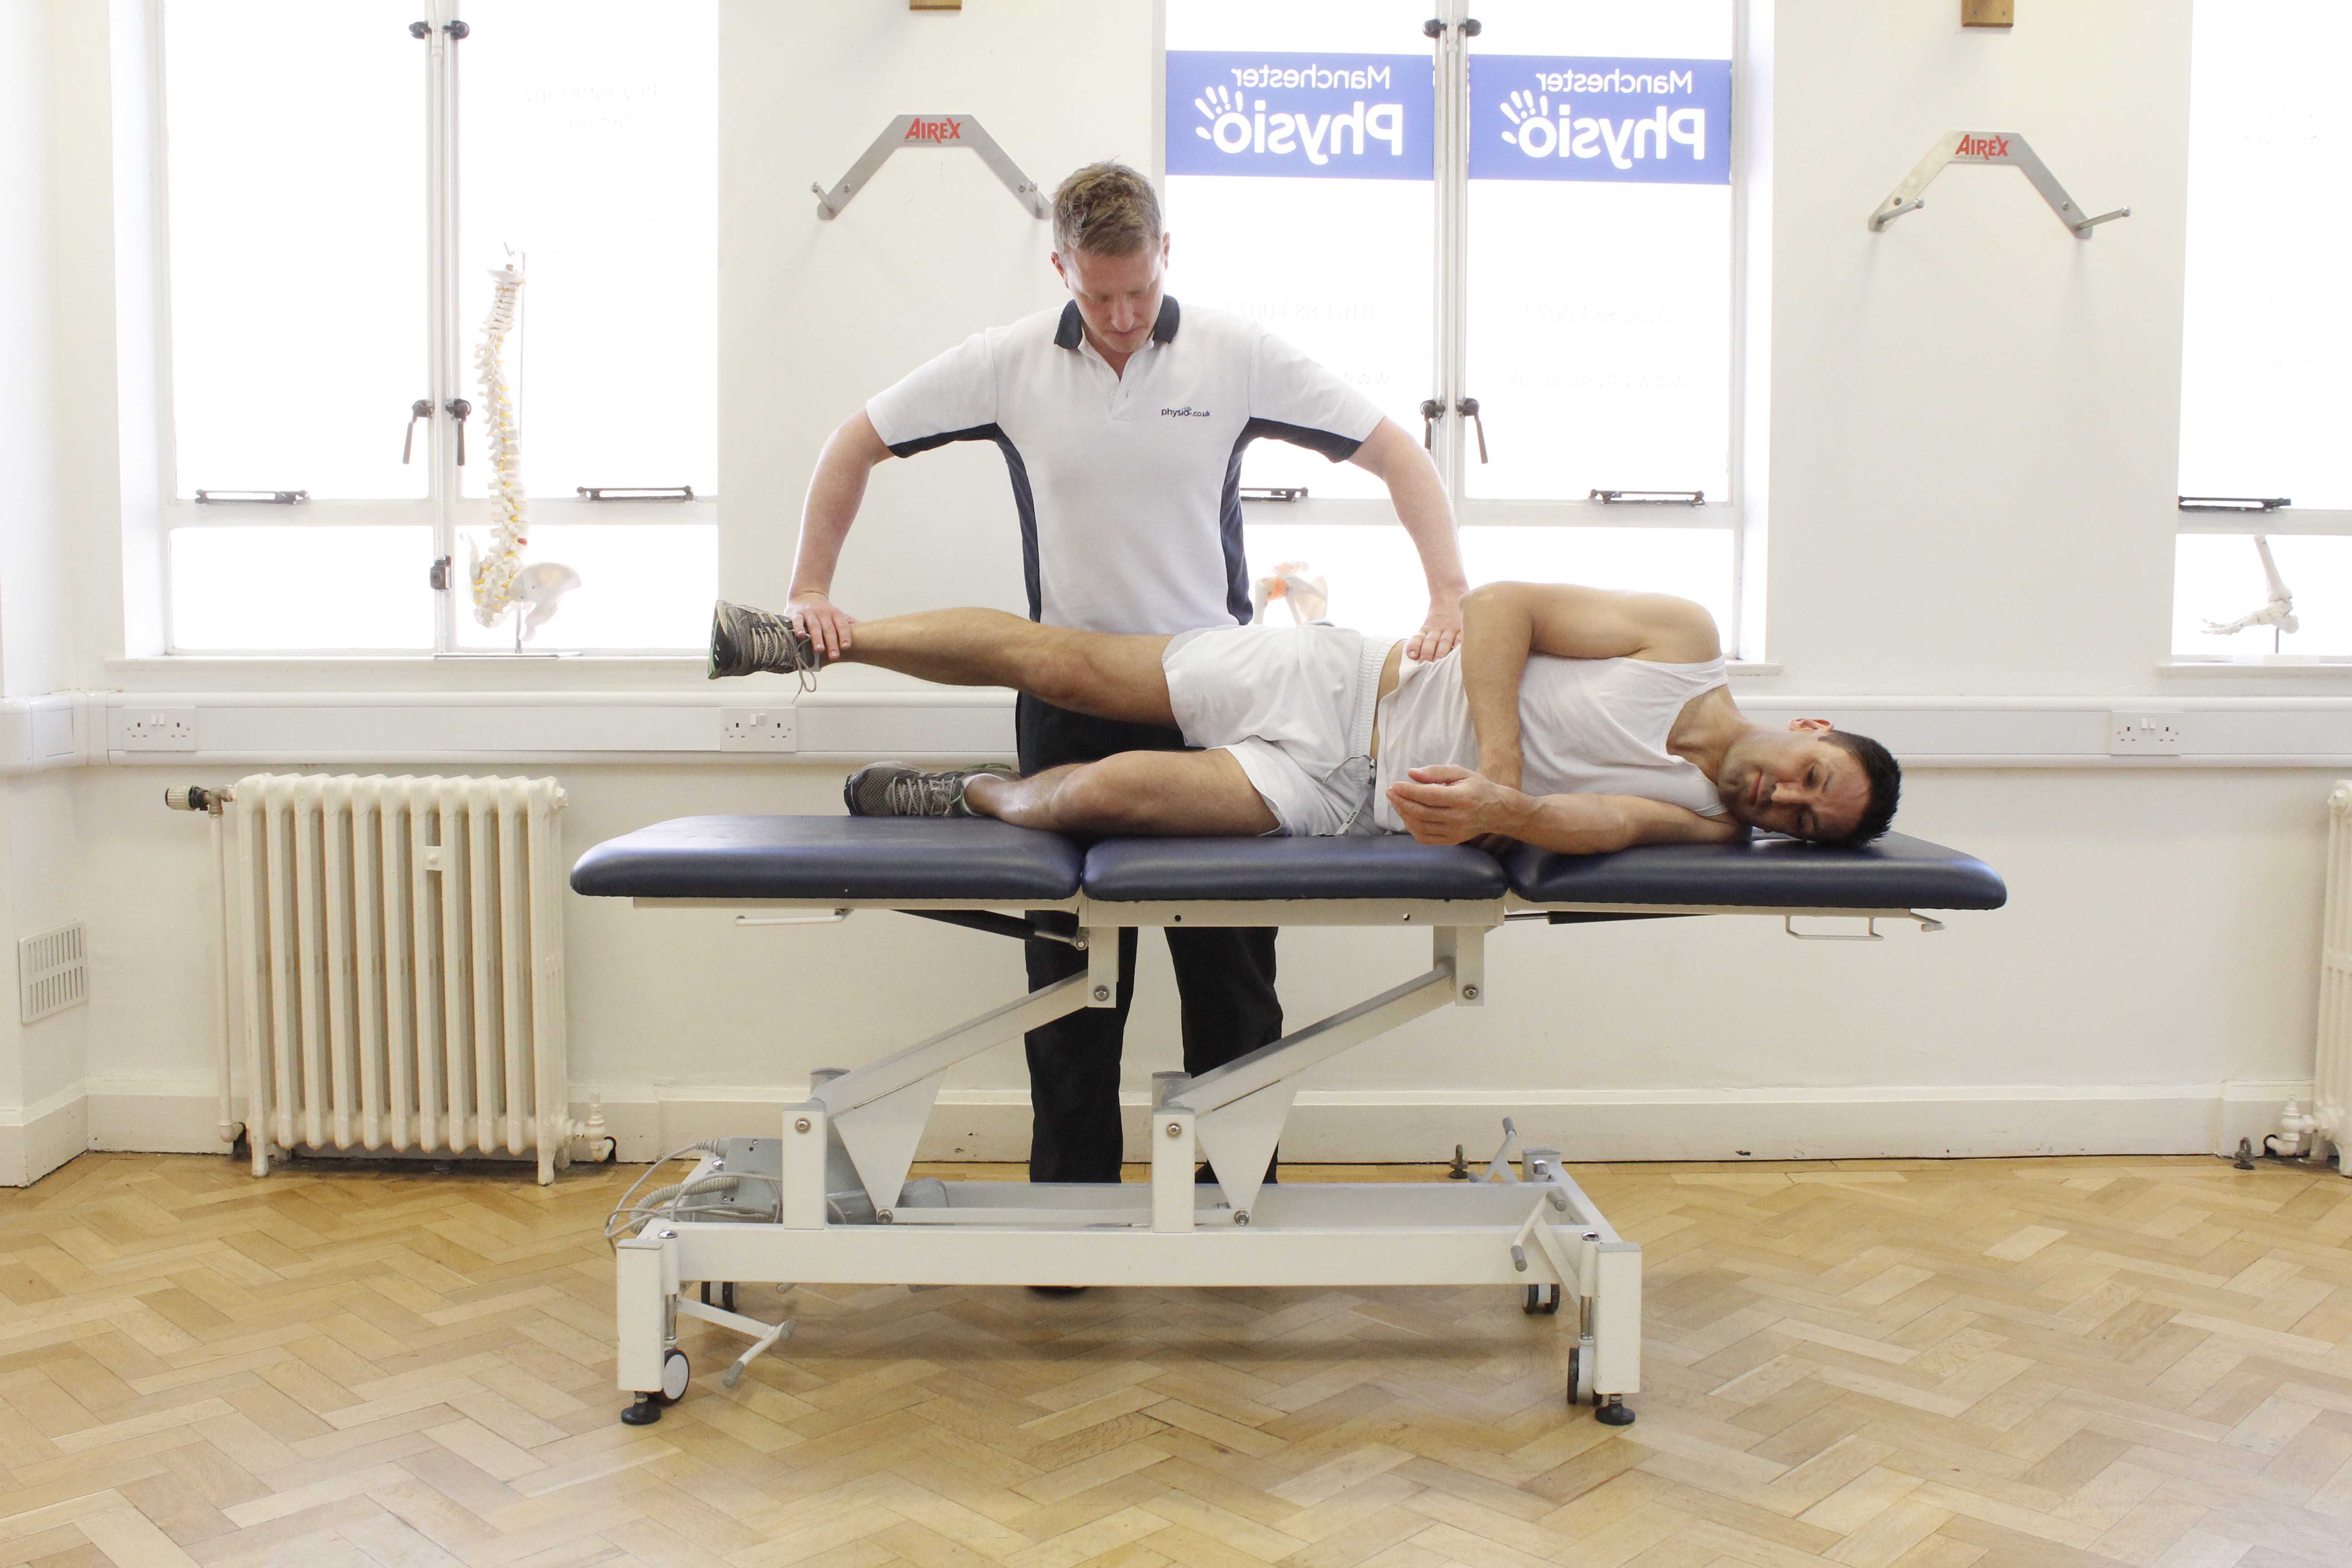 Hip abductor strengthening exercises assisted by a MSK physiotherapist